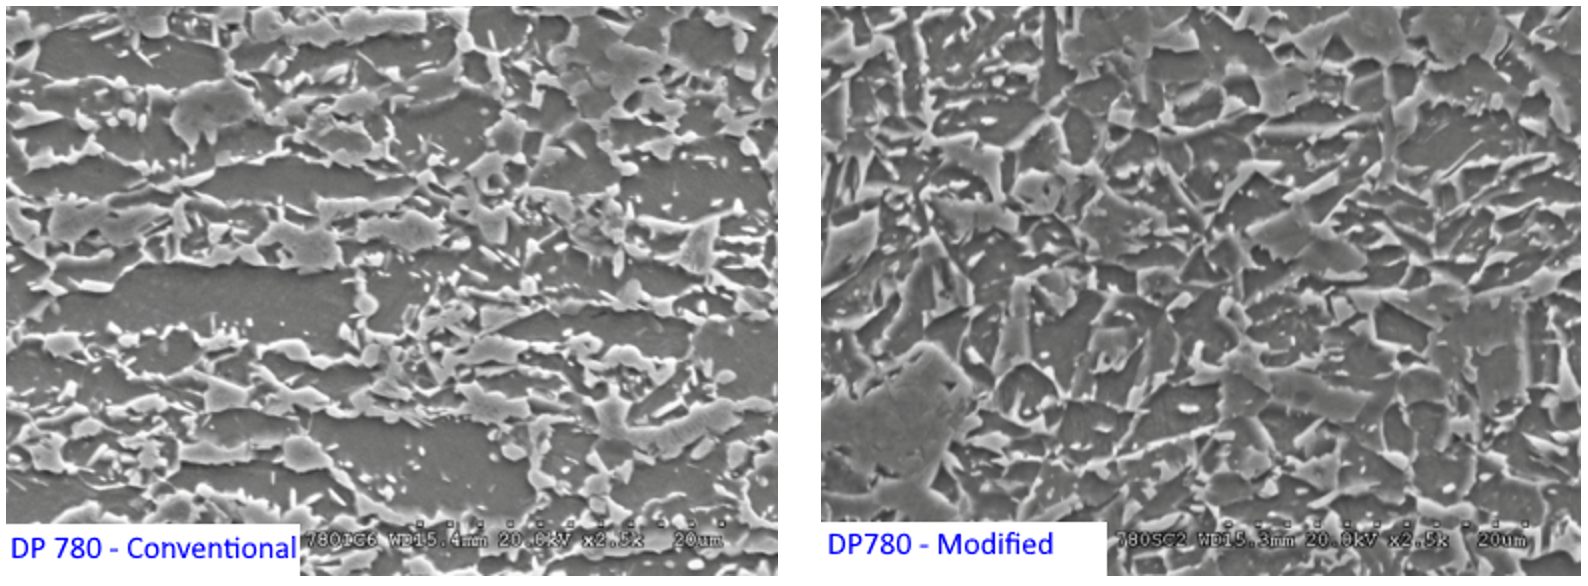 Figure 4:  Comparison of the microstructure of a conventional DP780 steel (left) with a similar chemistry modified to improve hole expansion (right). Overall, there is the same fraction of martensite in both grades, but the modified chemistry has finer features.C-10